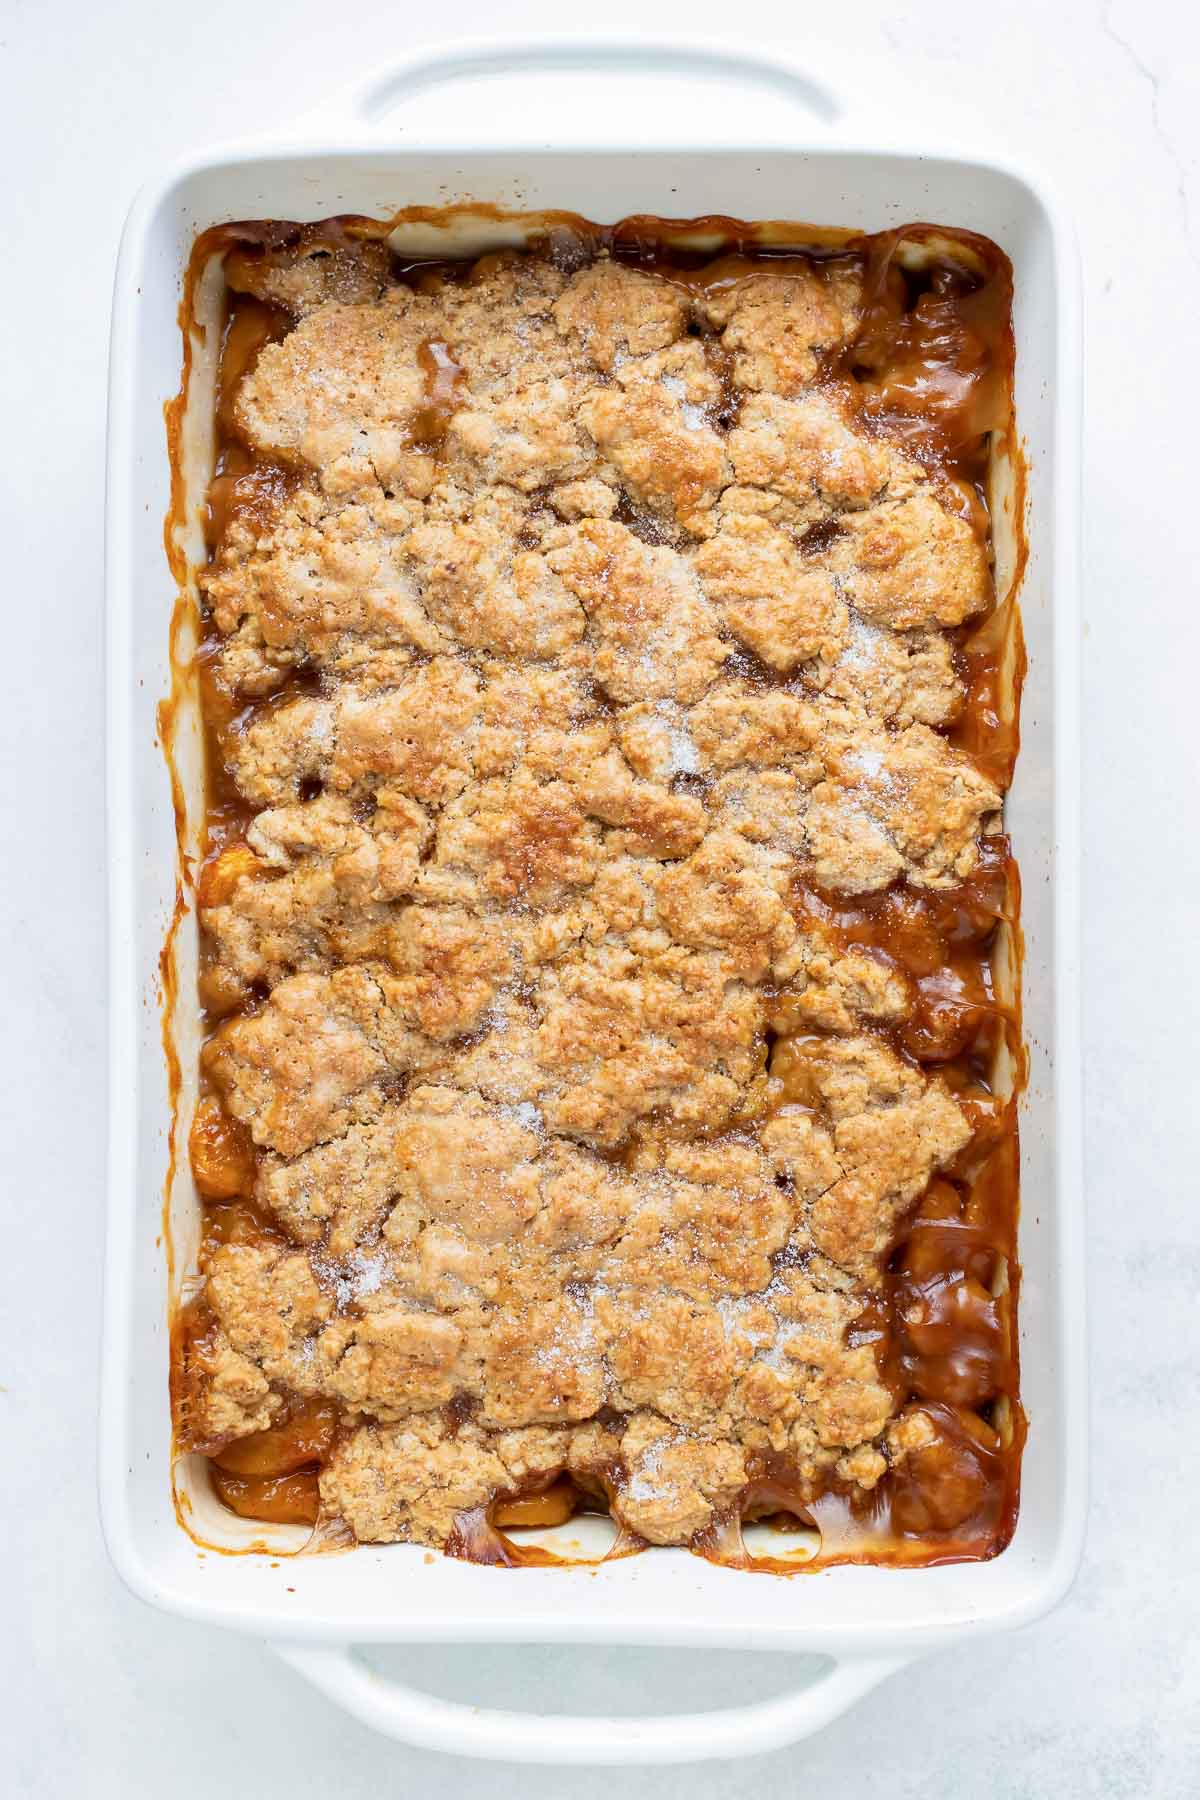 Fully baked peach cobbler is ready to enjoy.